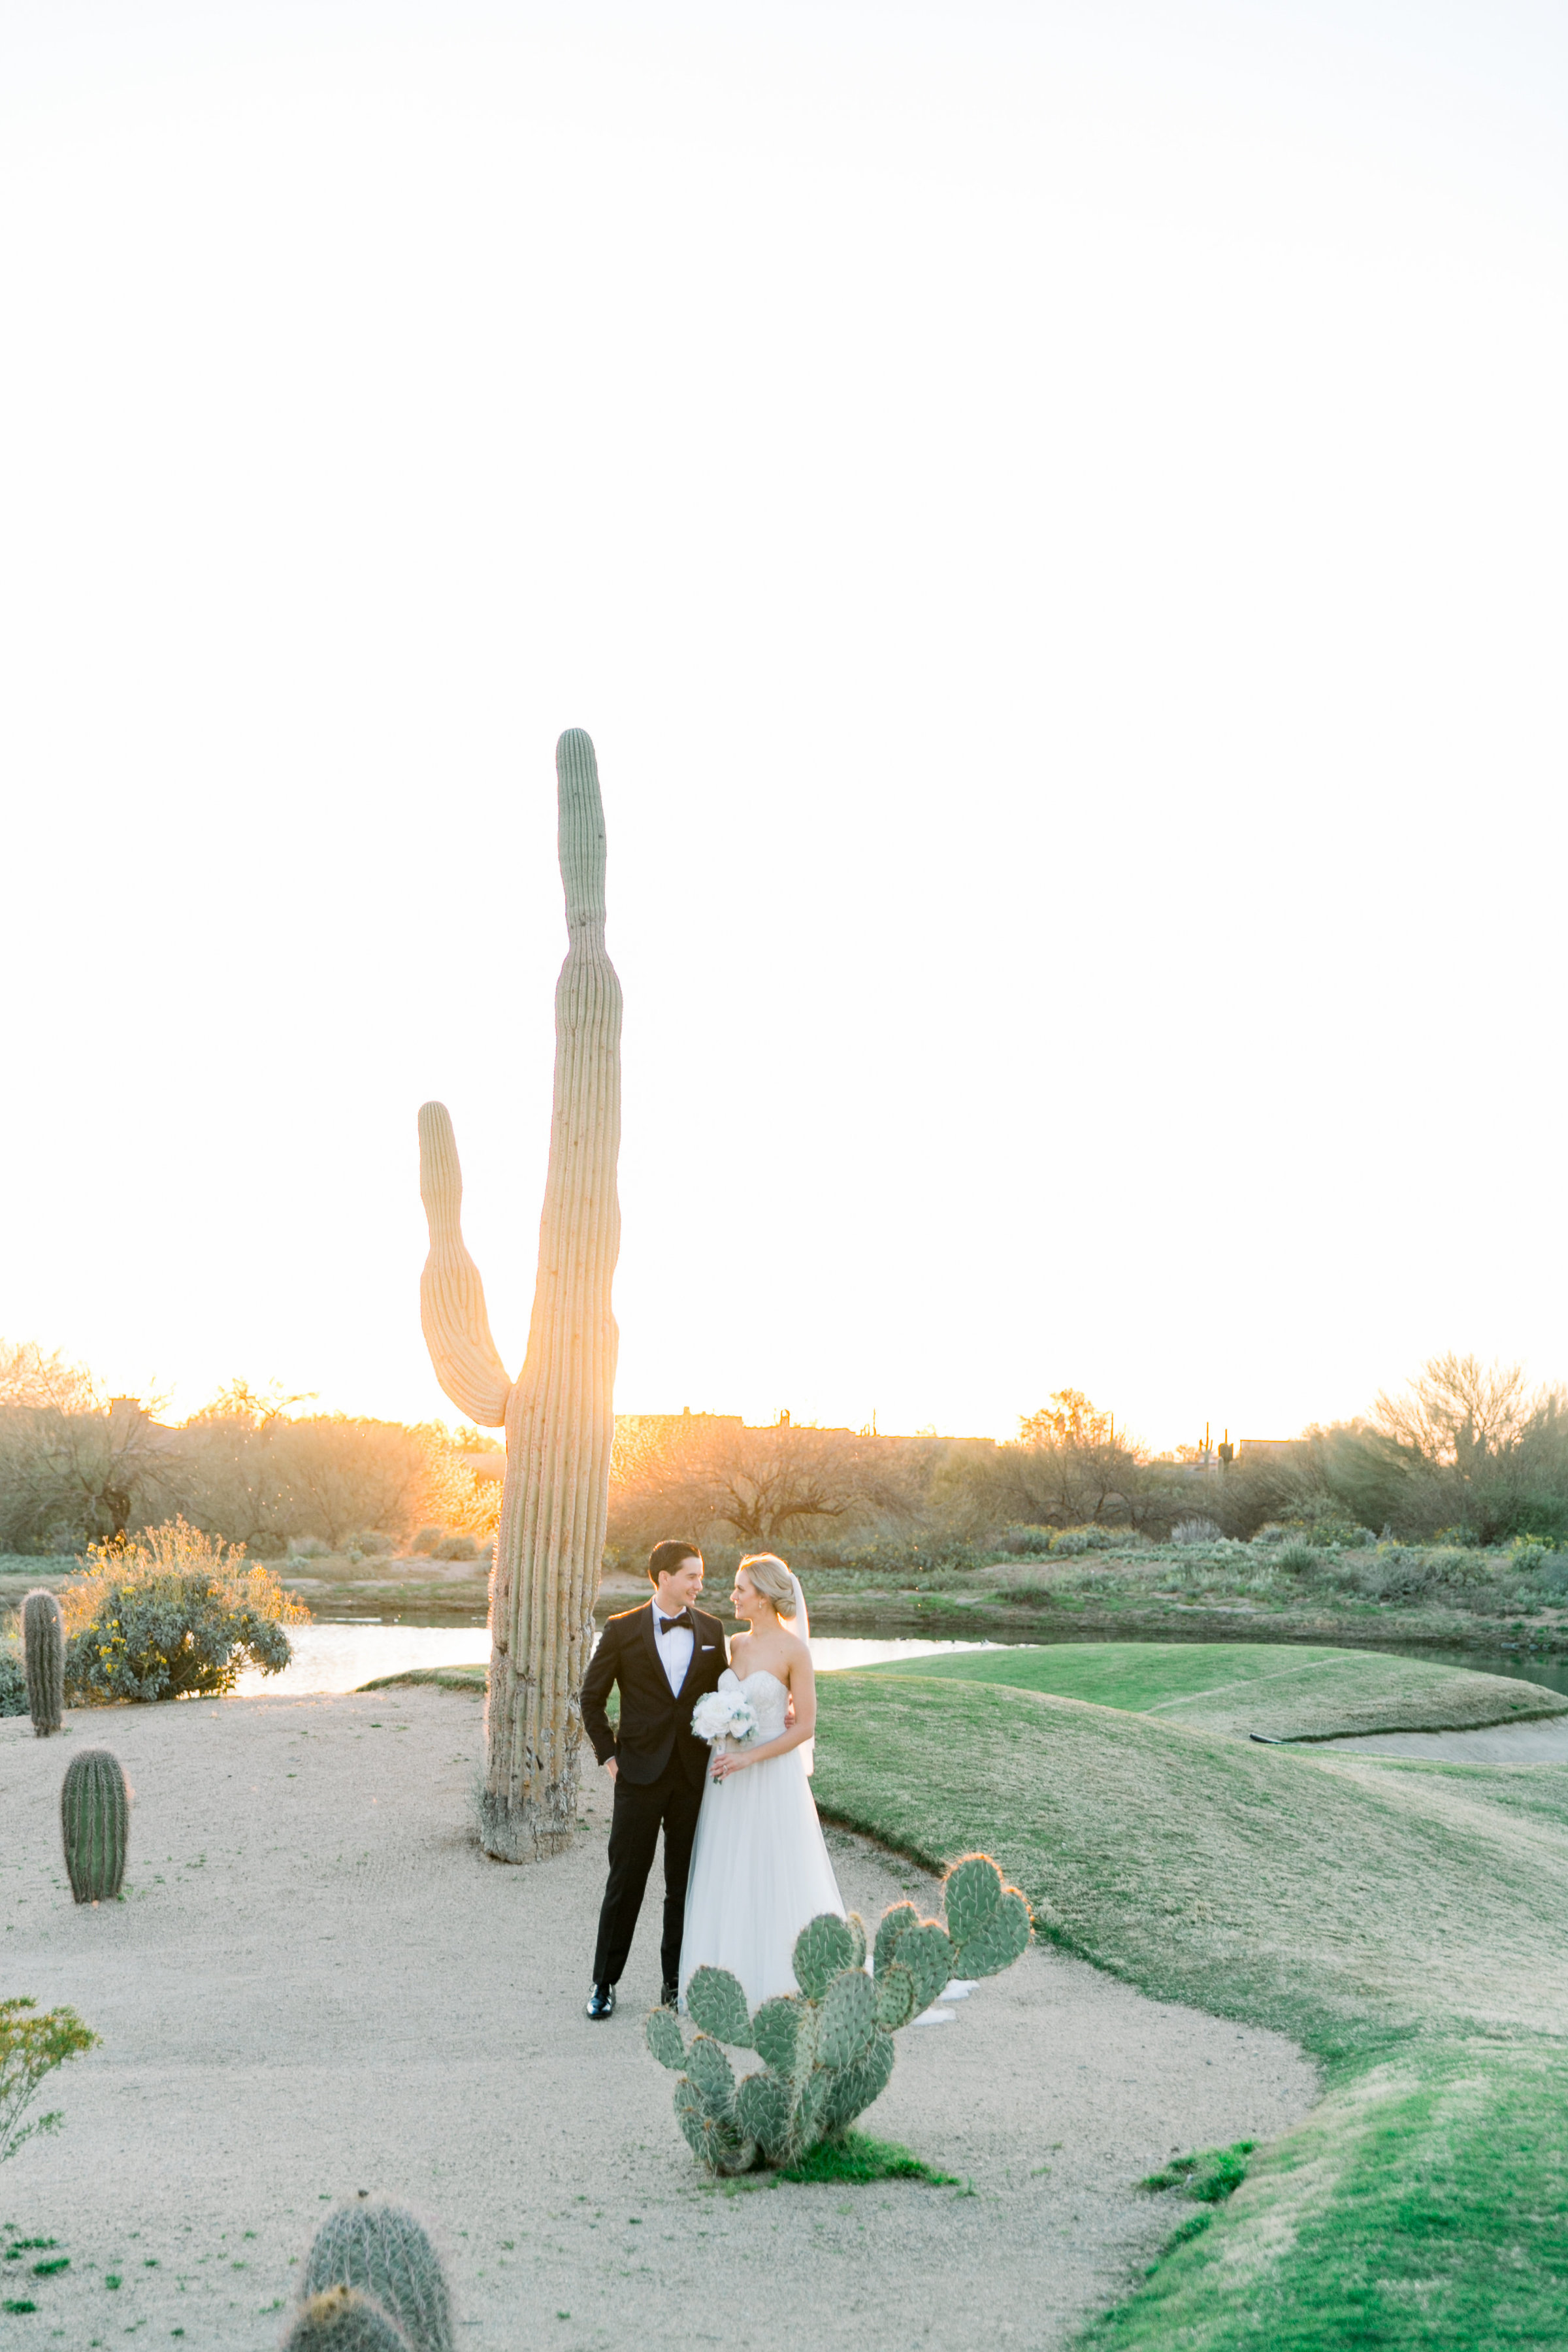 Karlie Colleen Photography - Arizona Wedding at The Troon Scottsdale Country Club - Paige & Shane -747